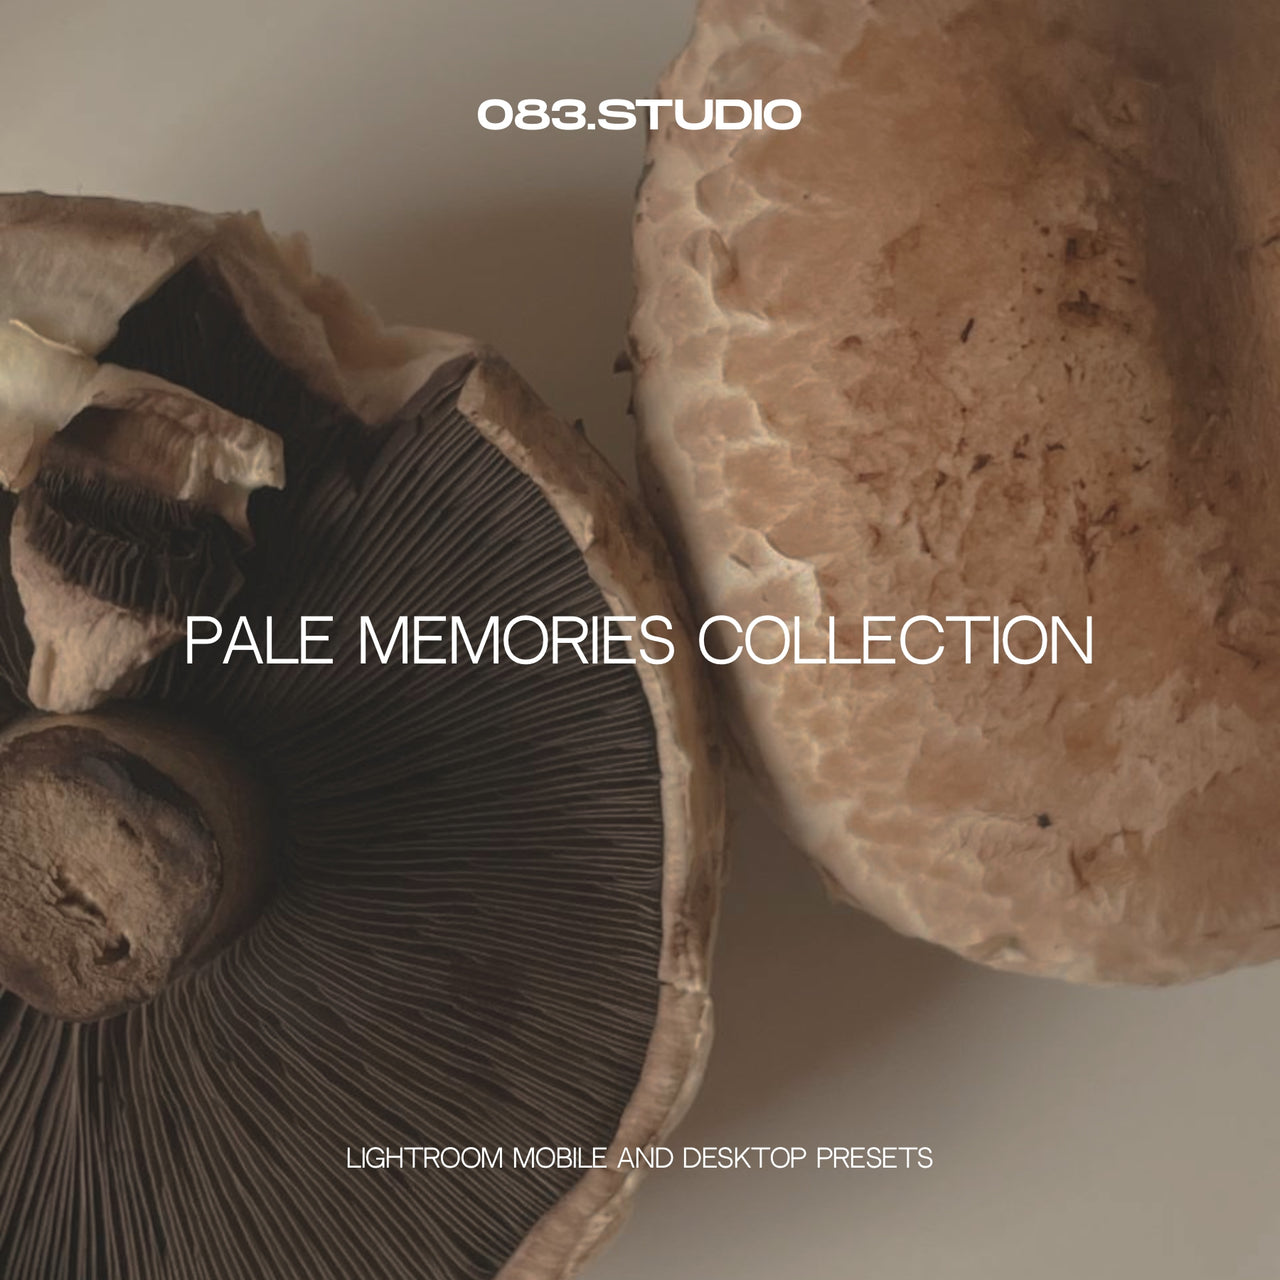 PALE MEMORIES COLLECTION